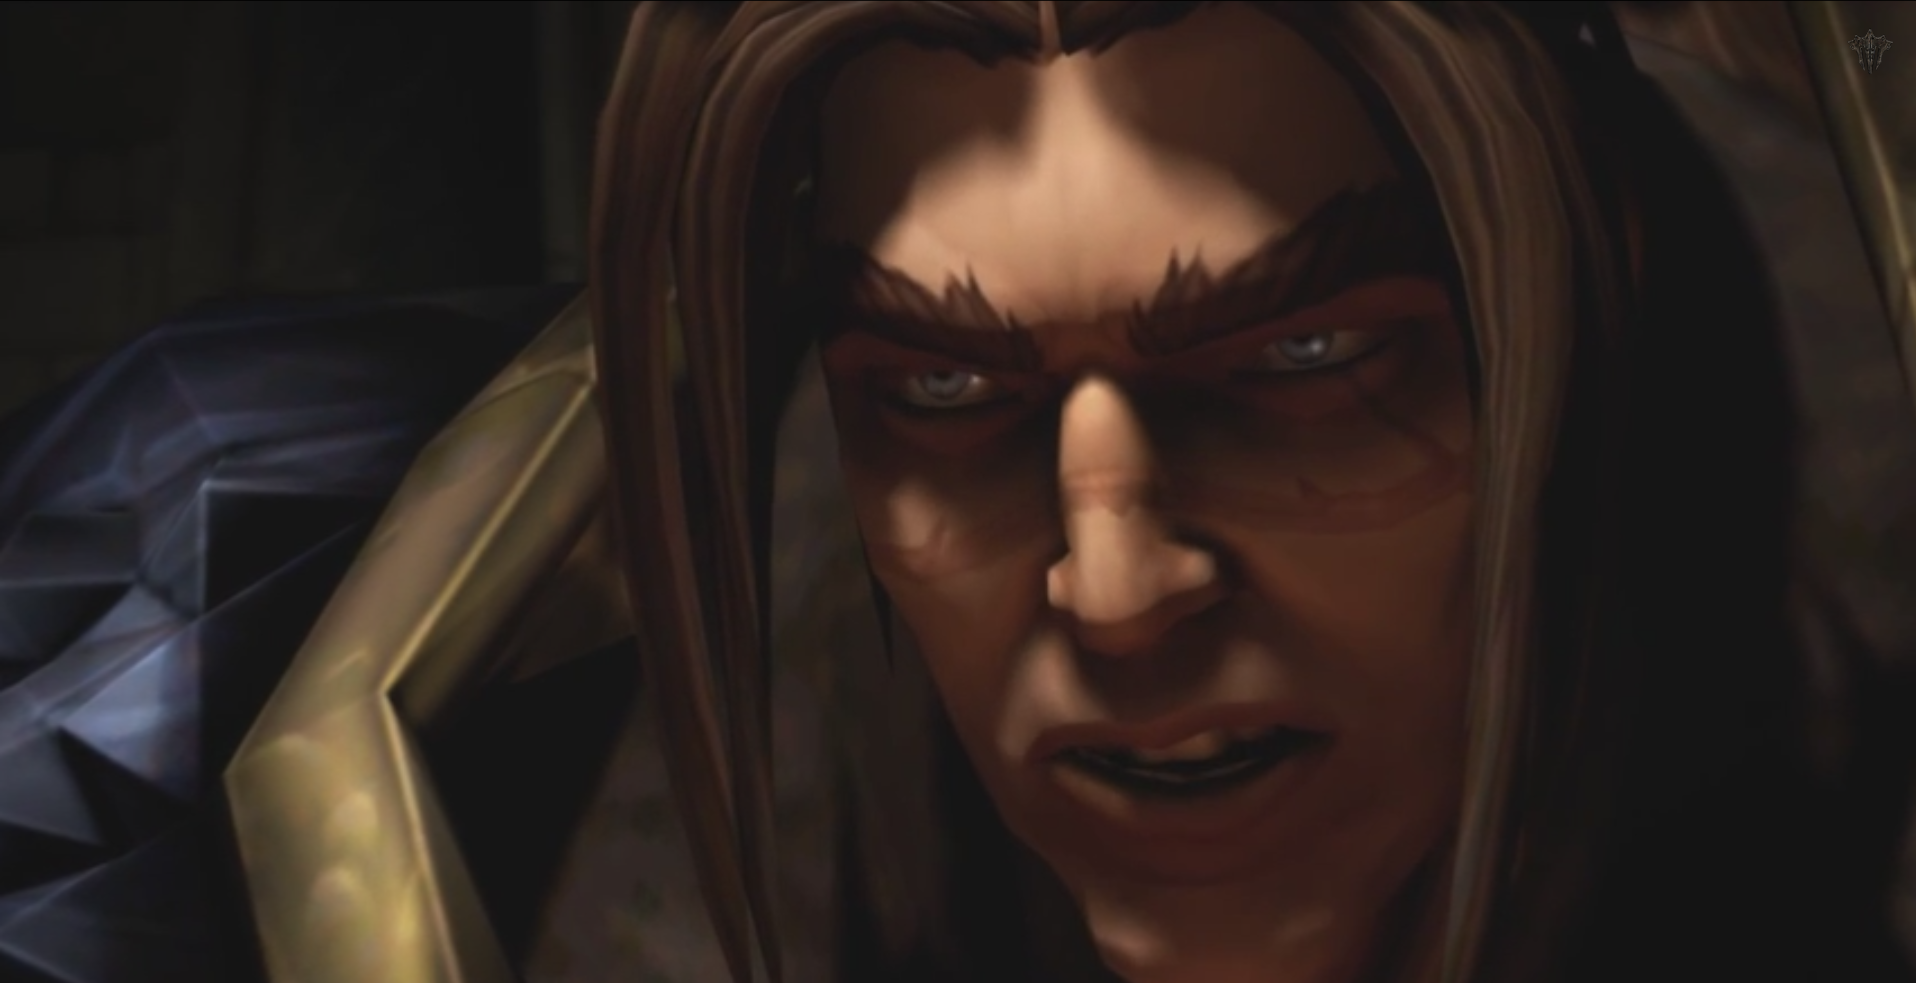 Sup with the teeth, Varian? 